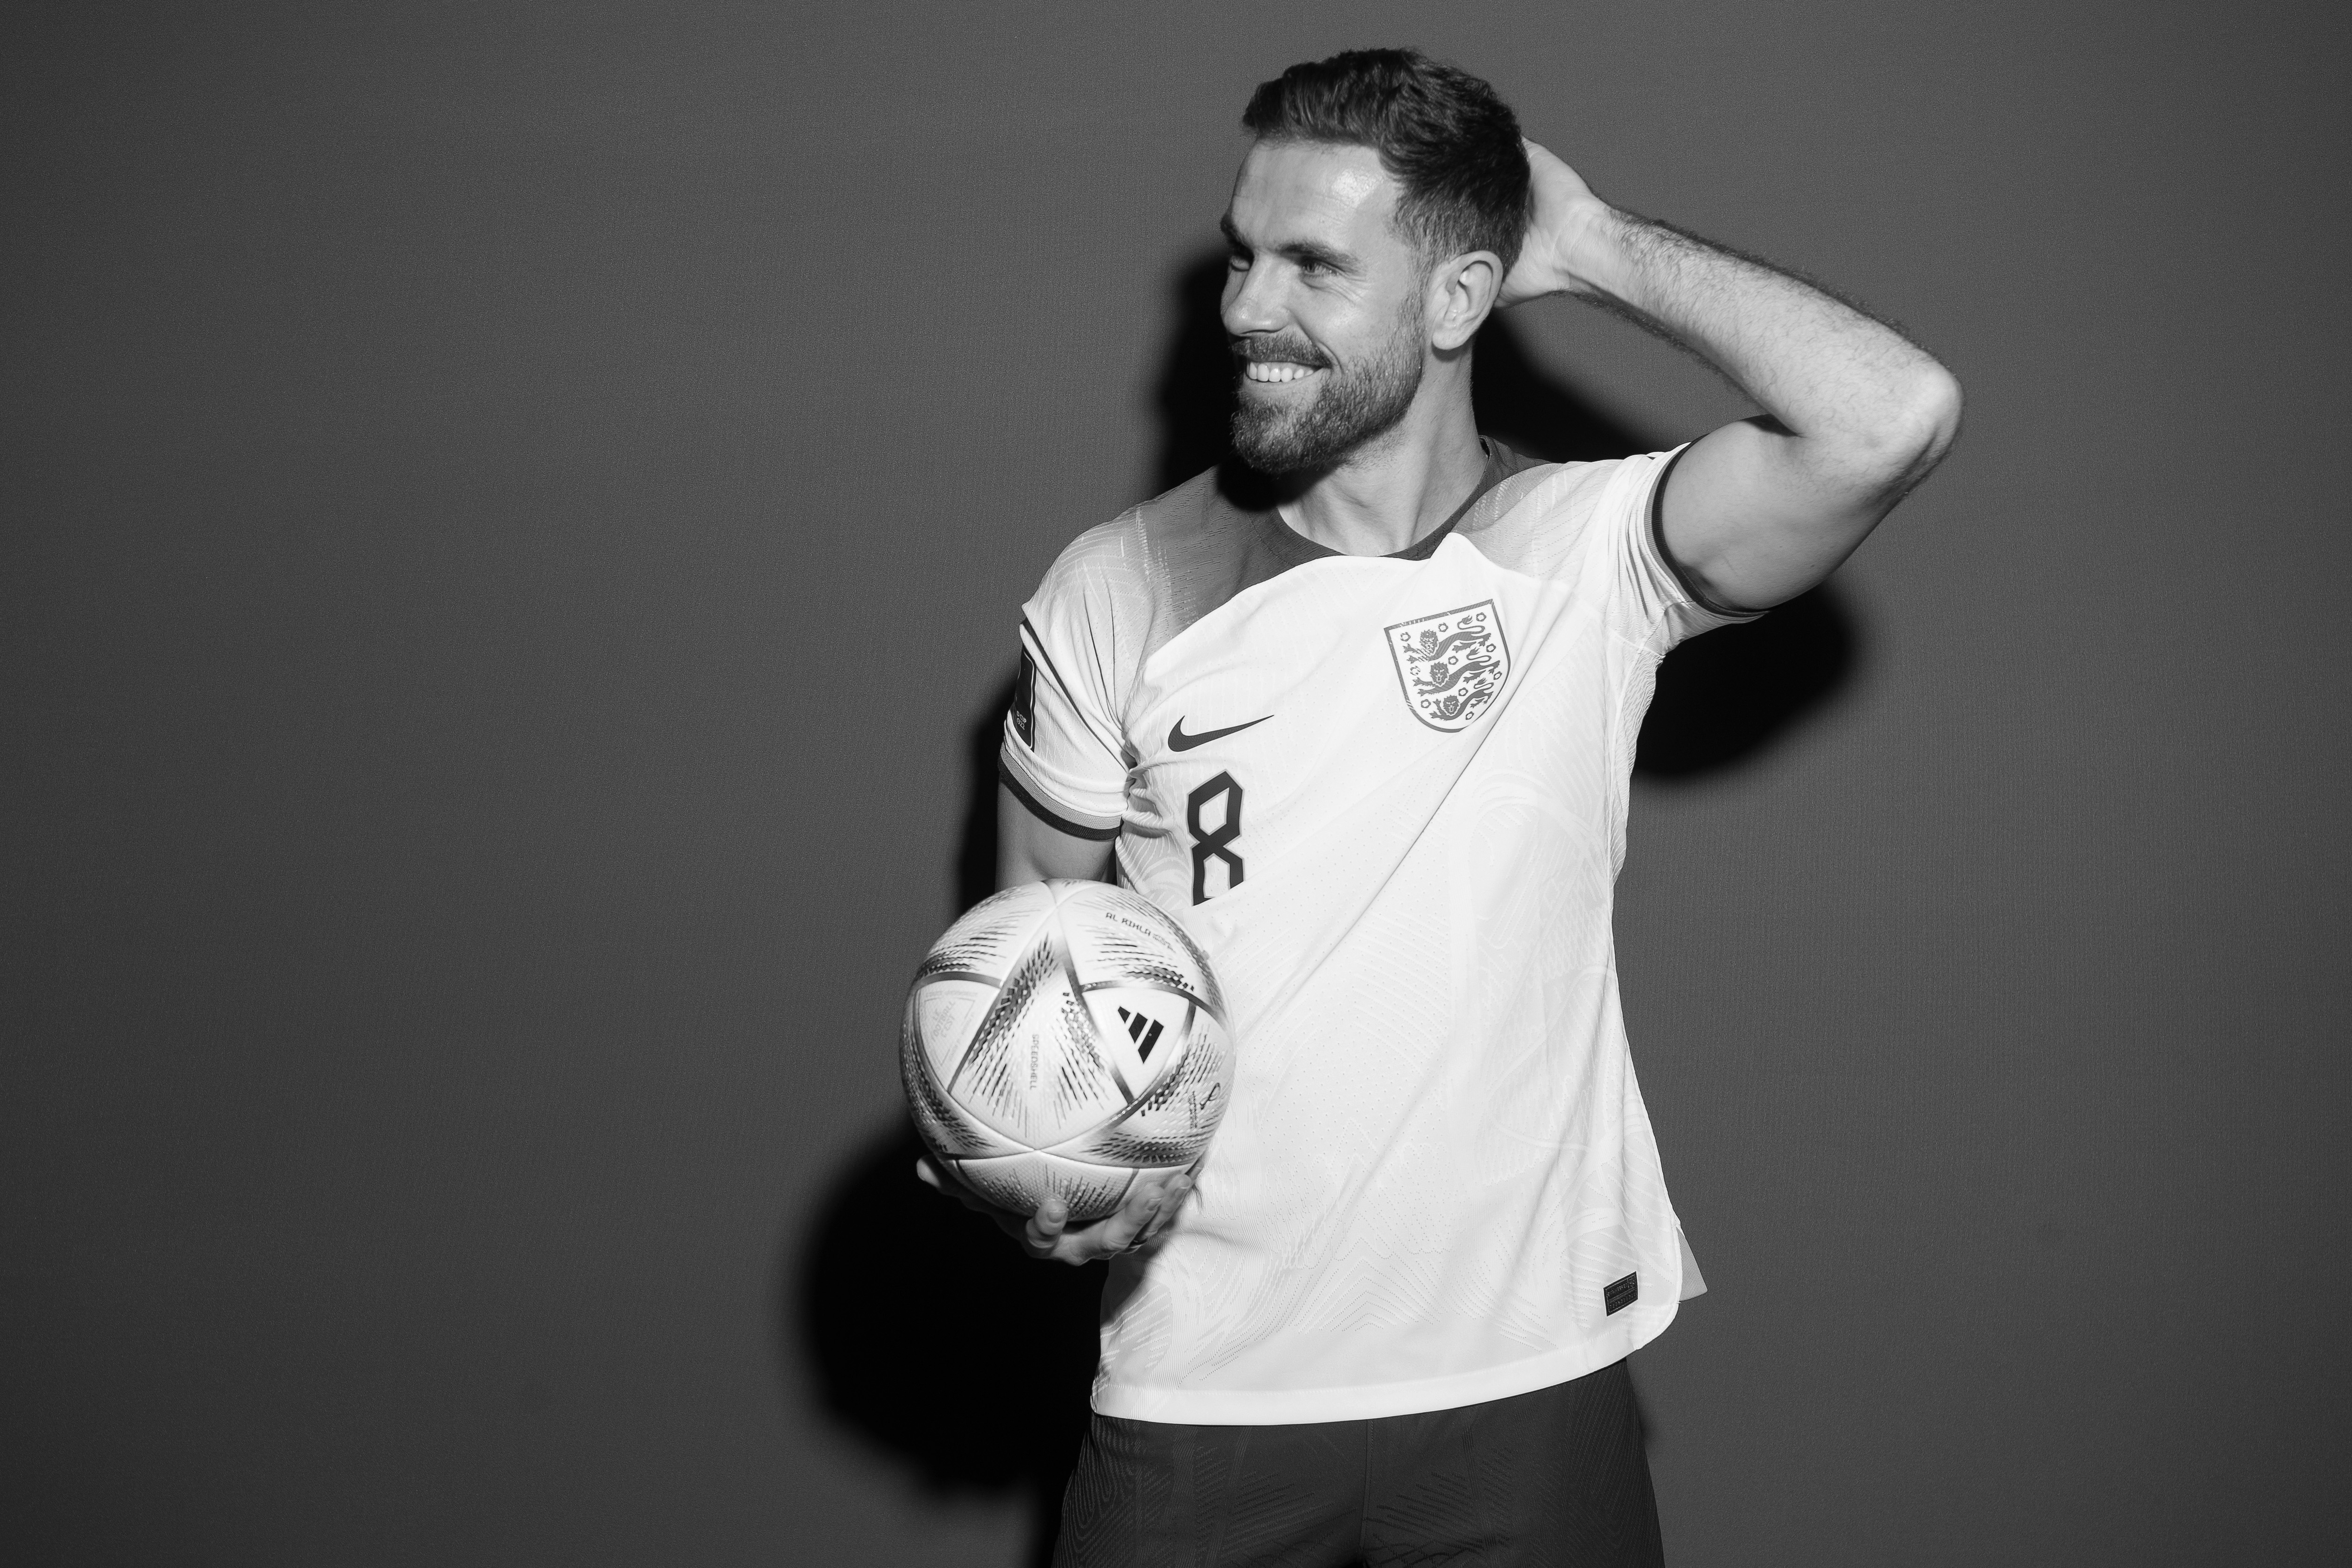 Jordan Henderson of England poses for a portrait during the official FIFA World Cup Qatar 2022 portrait session on November 16, 2022 in Doha, Qatar.